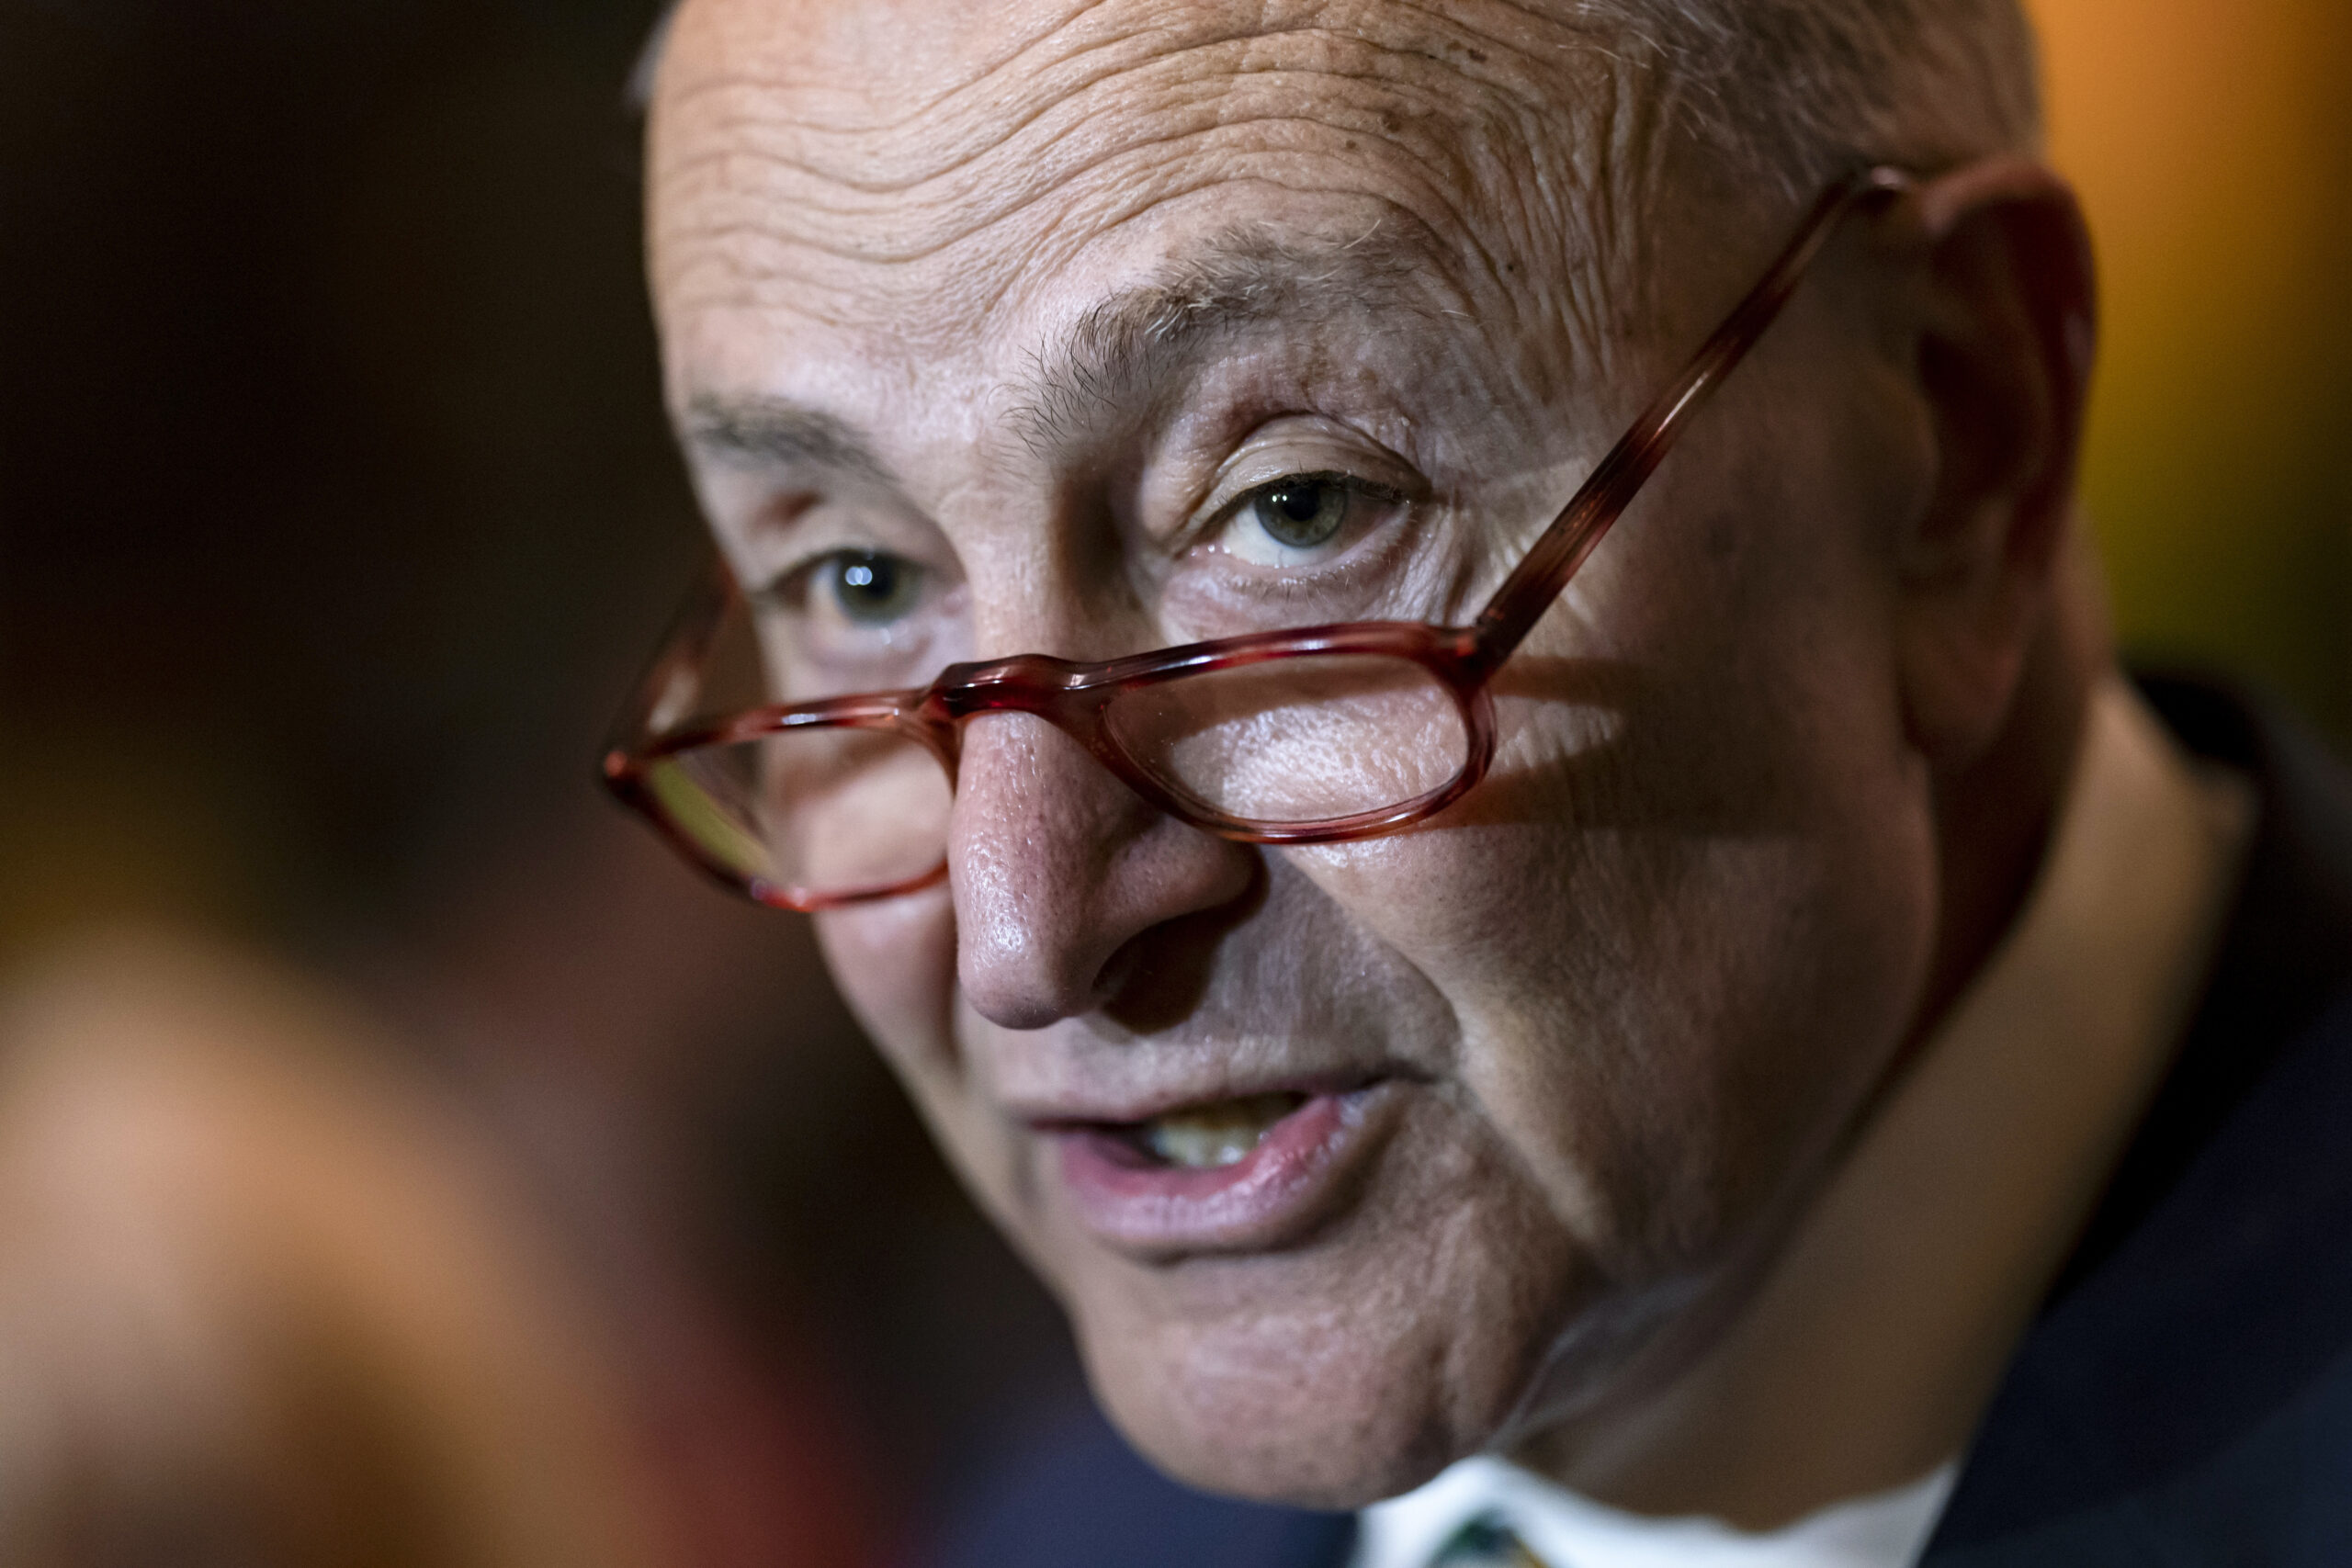 Senate Majority Leader Chuck Schumer, D-N.Y., meets with reporters following a Democratic Caucus meeting, at the Capitol in Washington, Tuesday, April 5, 2022. (AP Photo/J. Scott Applewhite)